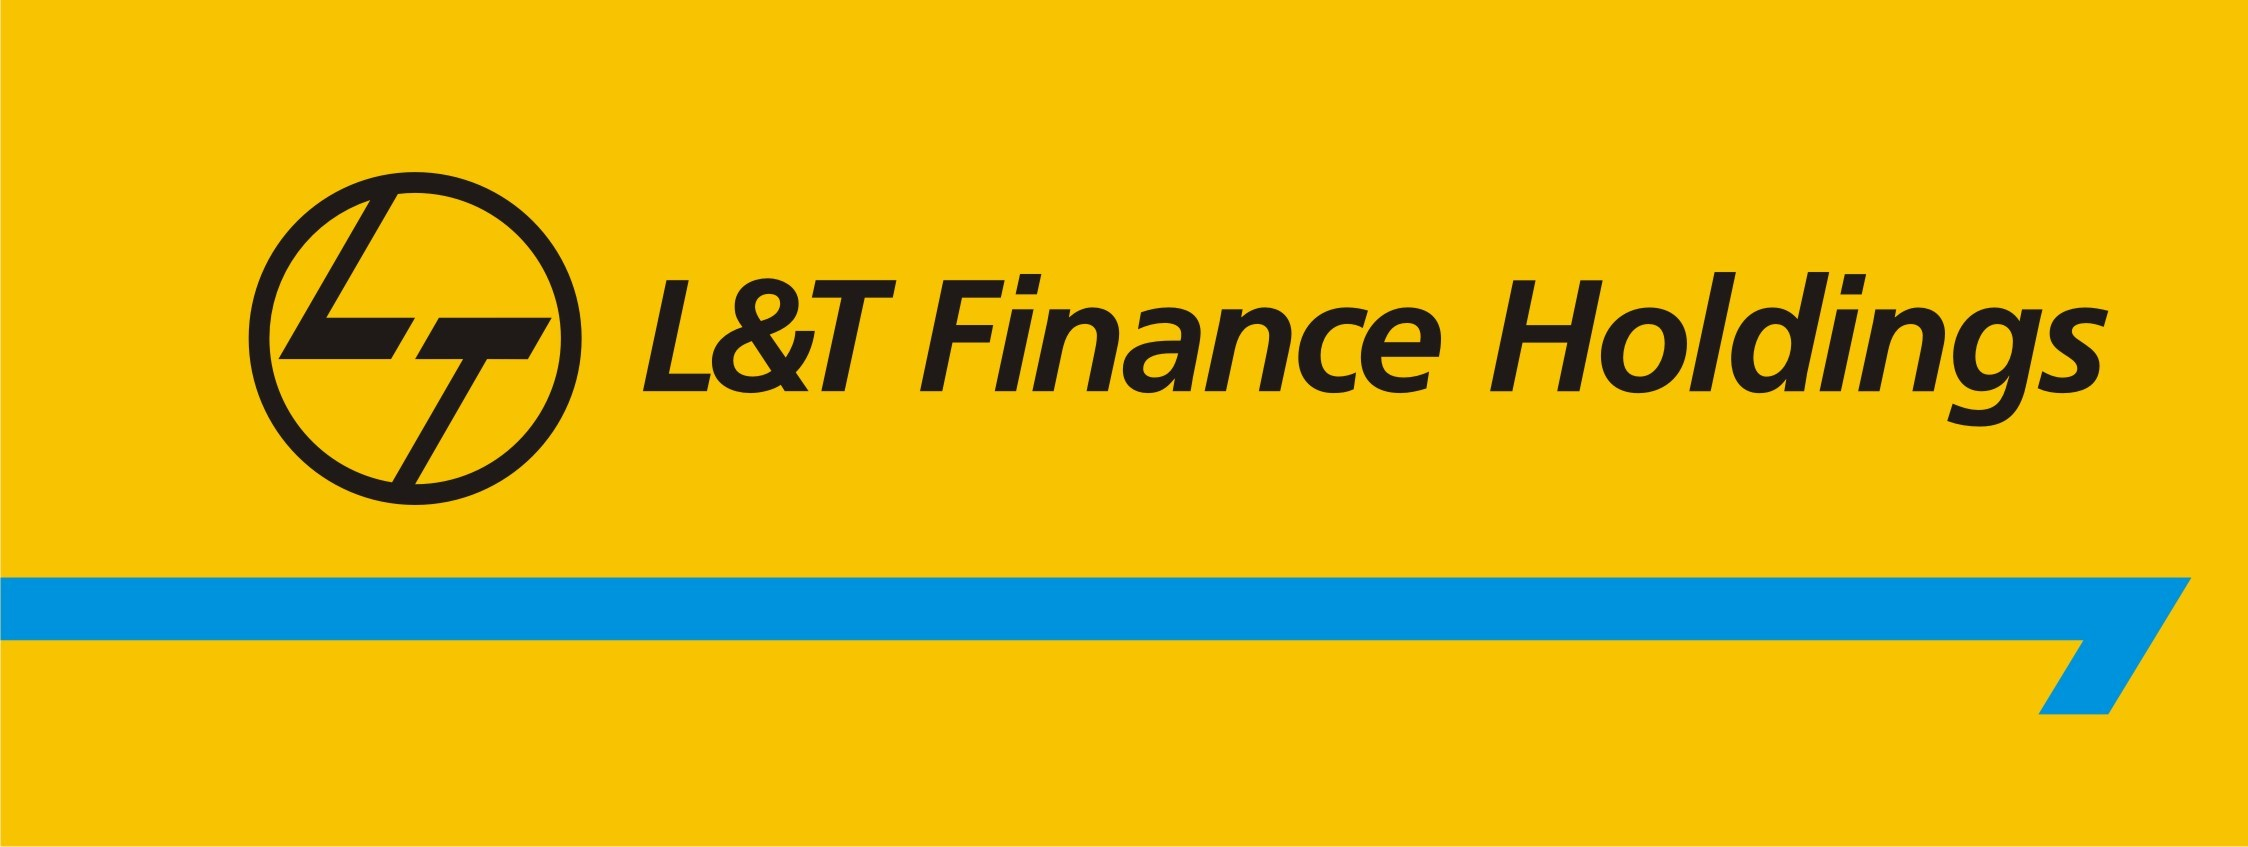 L&T Finance Holdings is taking Coordinated Action on Climate Issues, Shows Latest Carbon Disclosure Rating